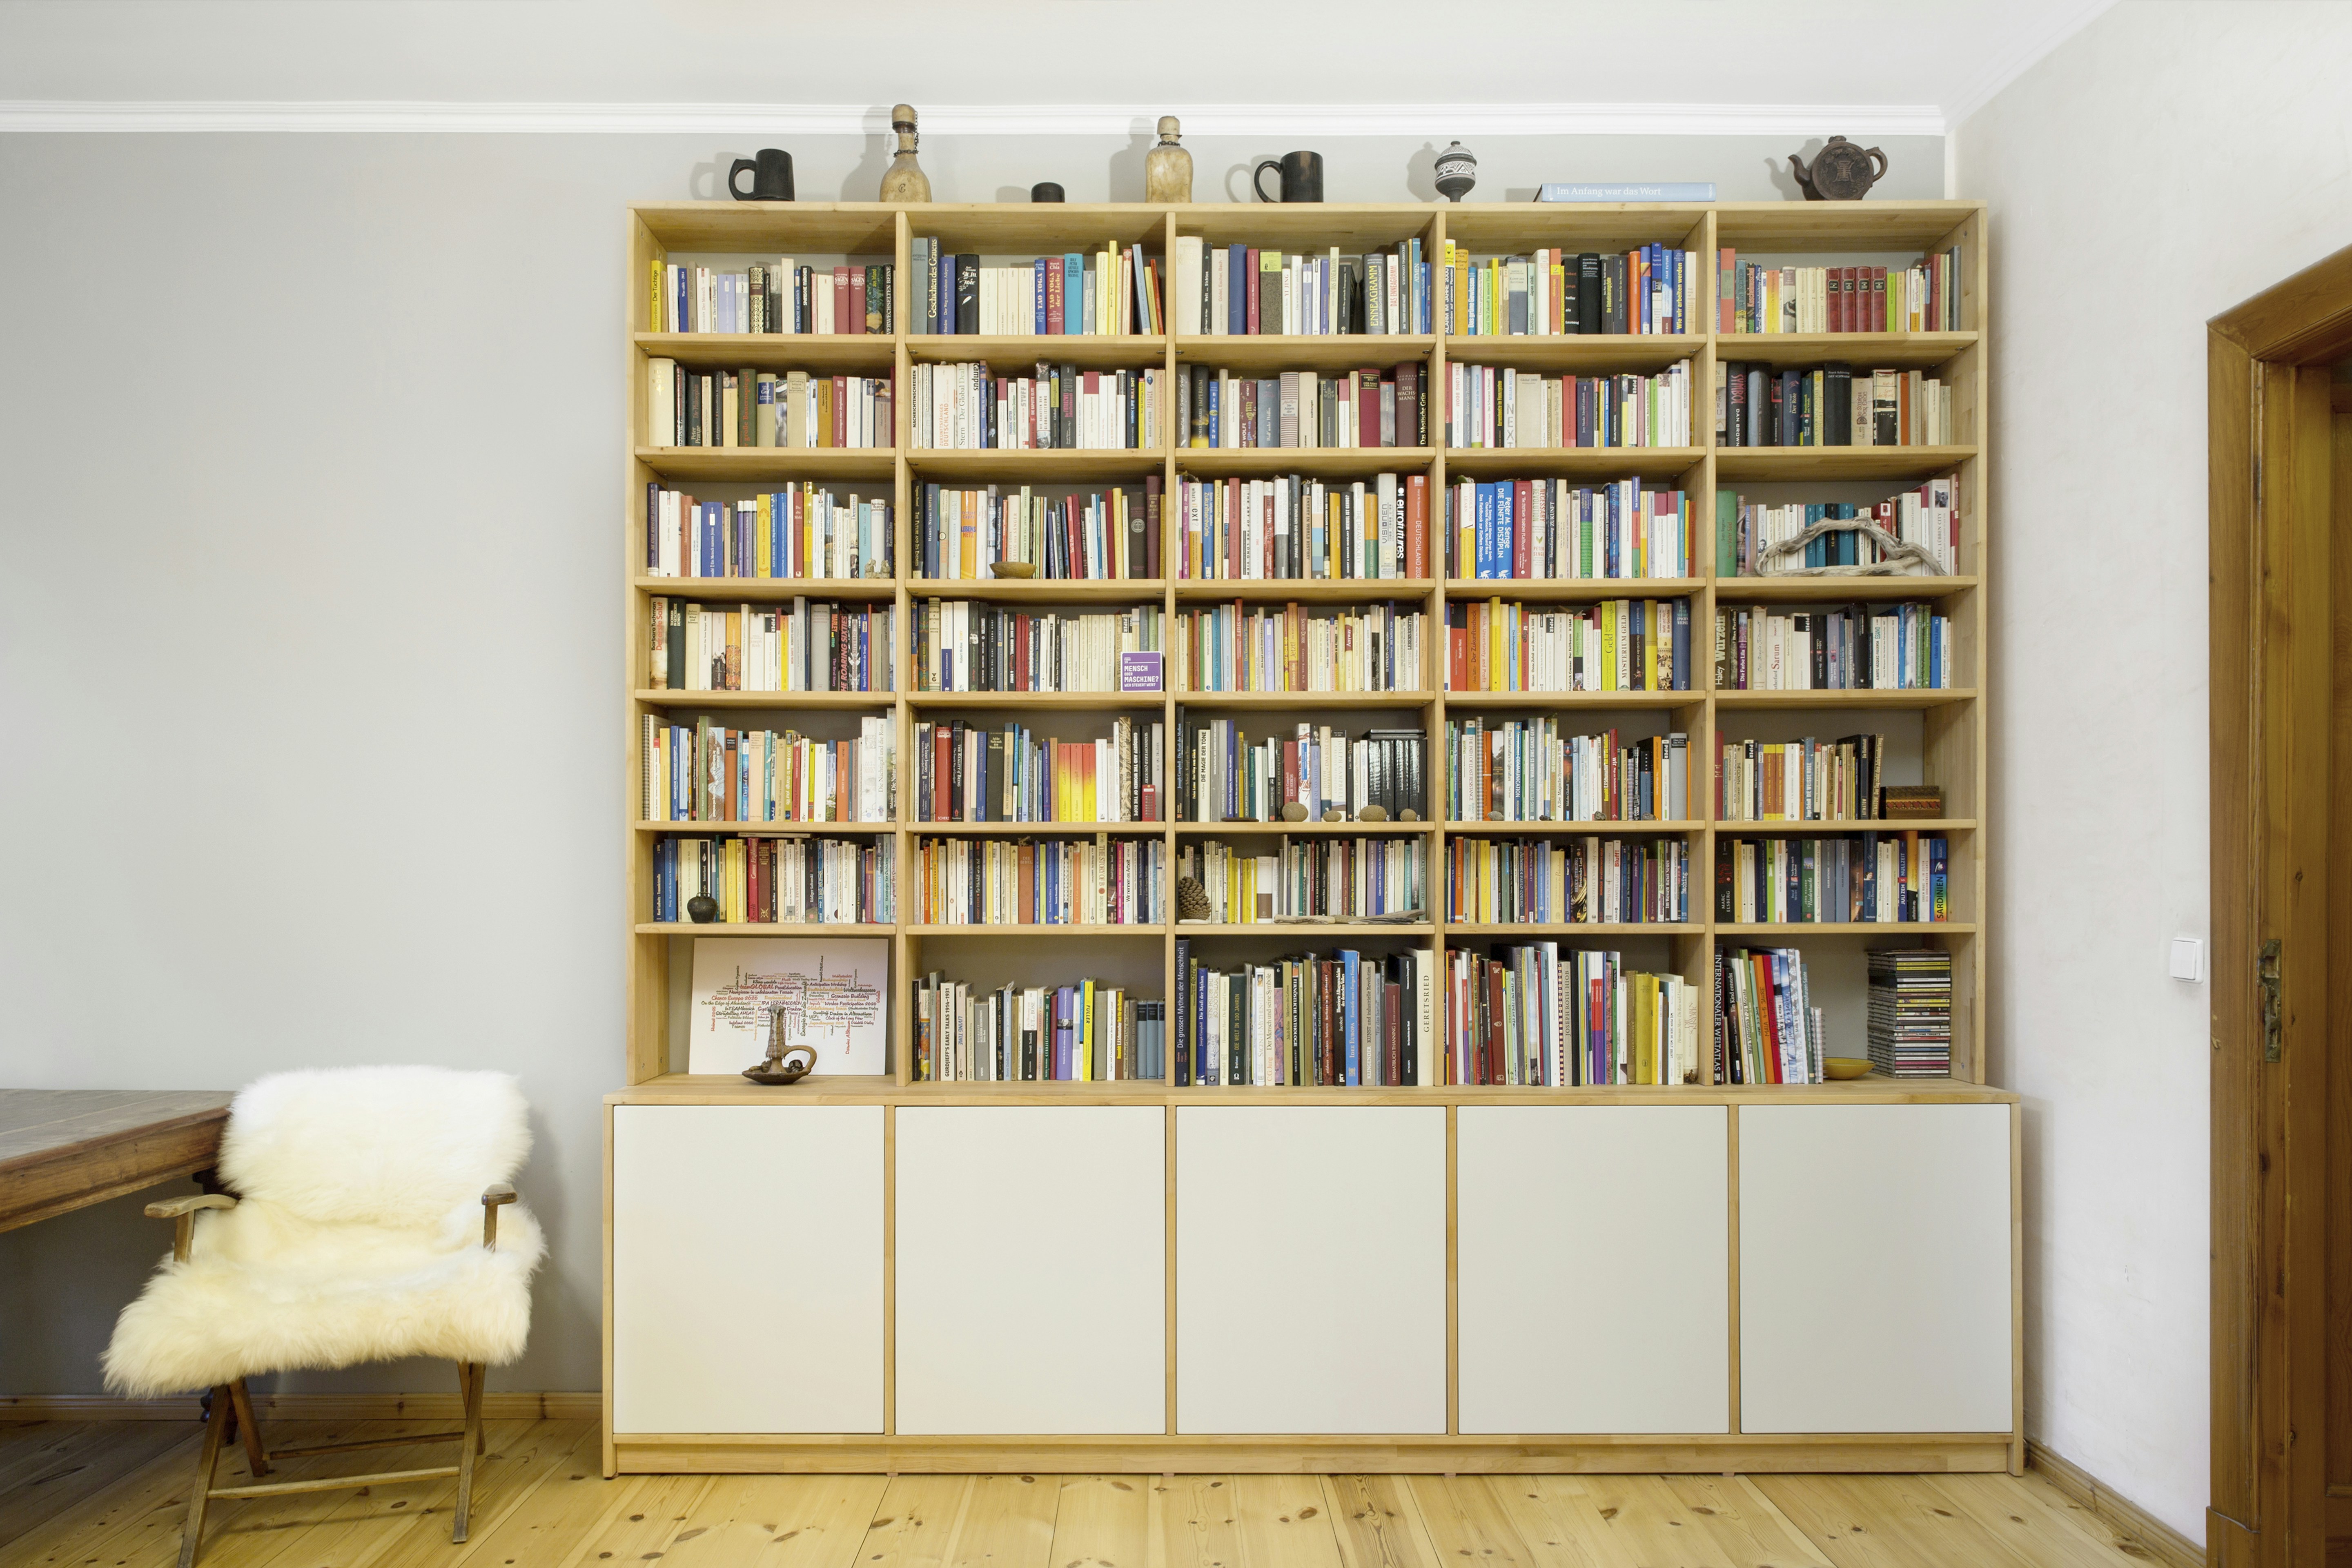 A bookshelf made of solid wood and mdf.